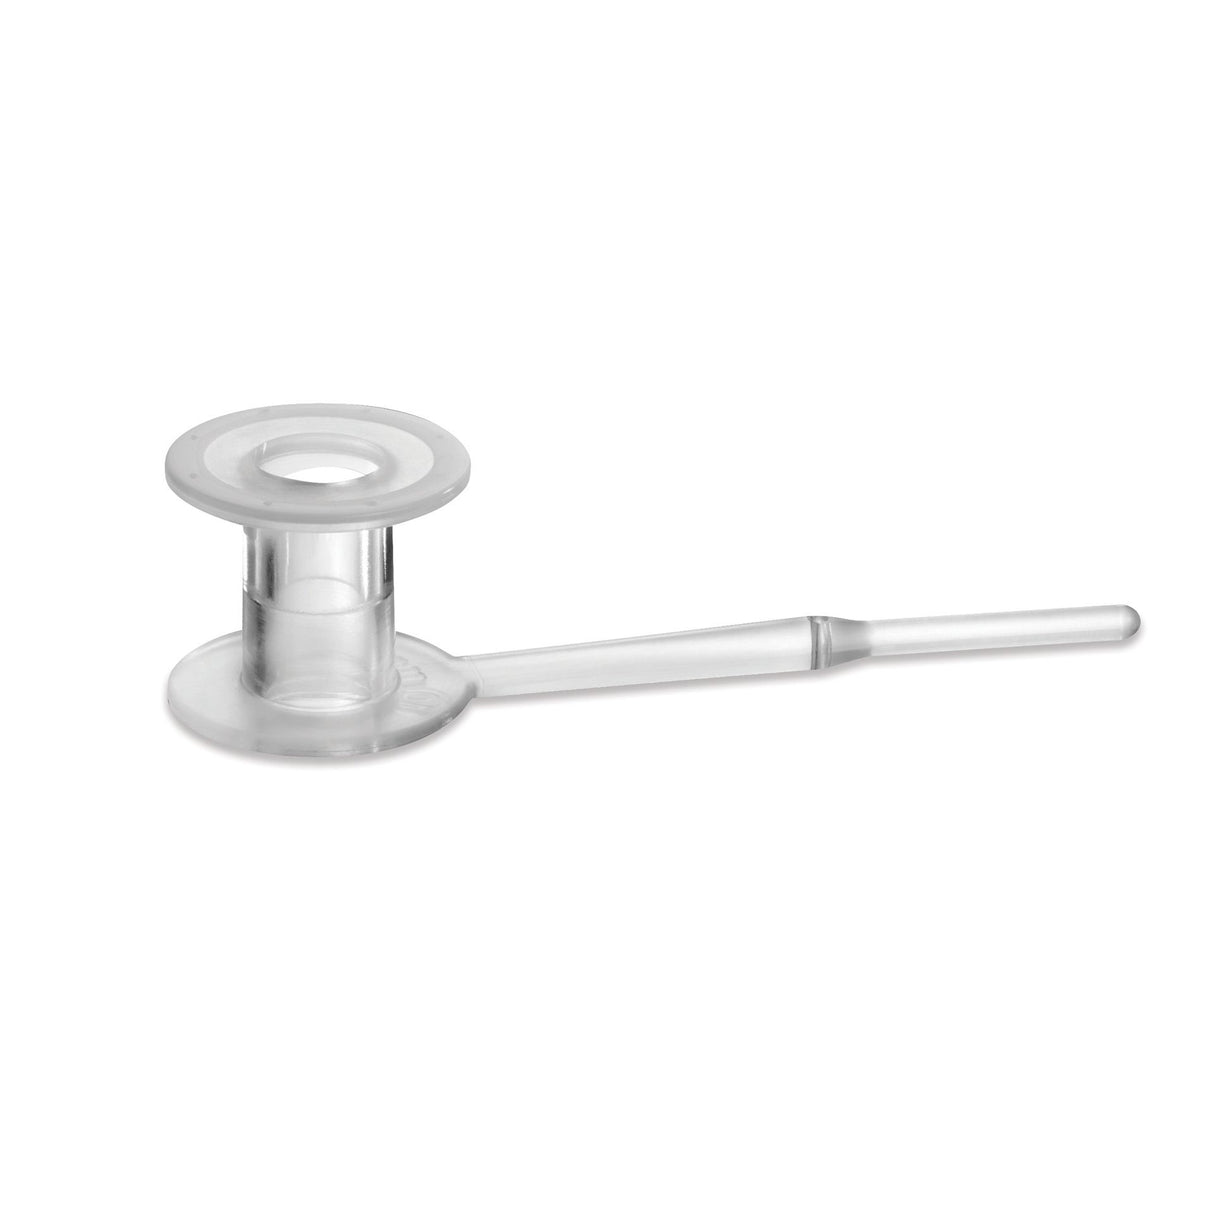 Image of Classic Indwelling Voice Prostheses, Sterile, 20 fr, 14 mm